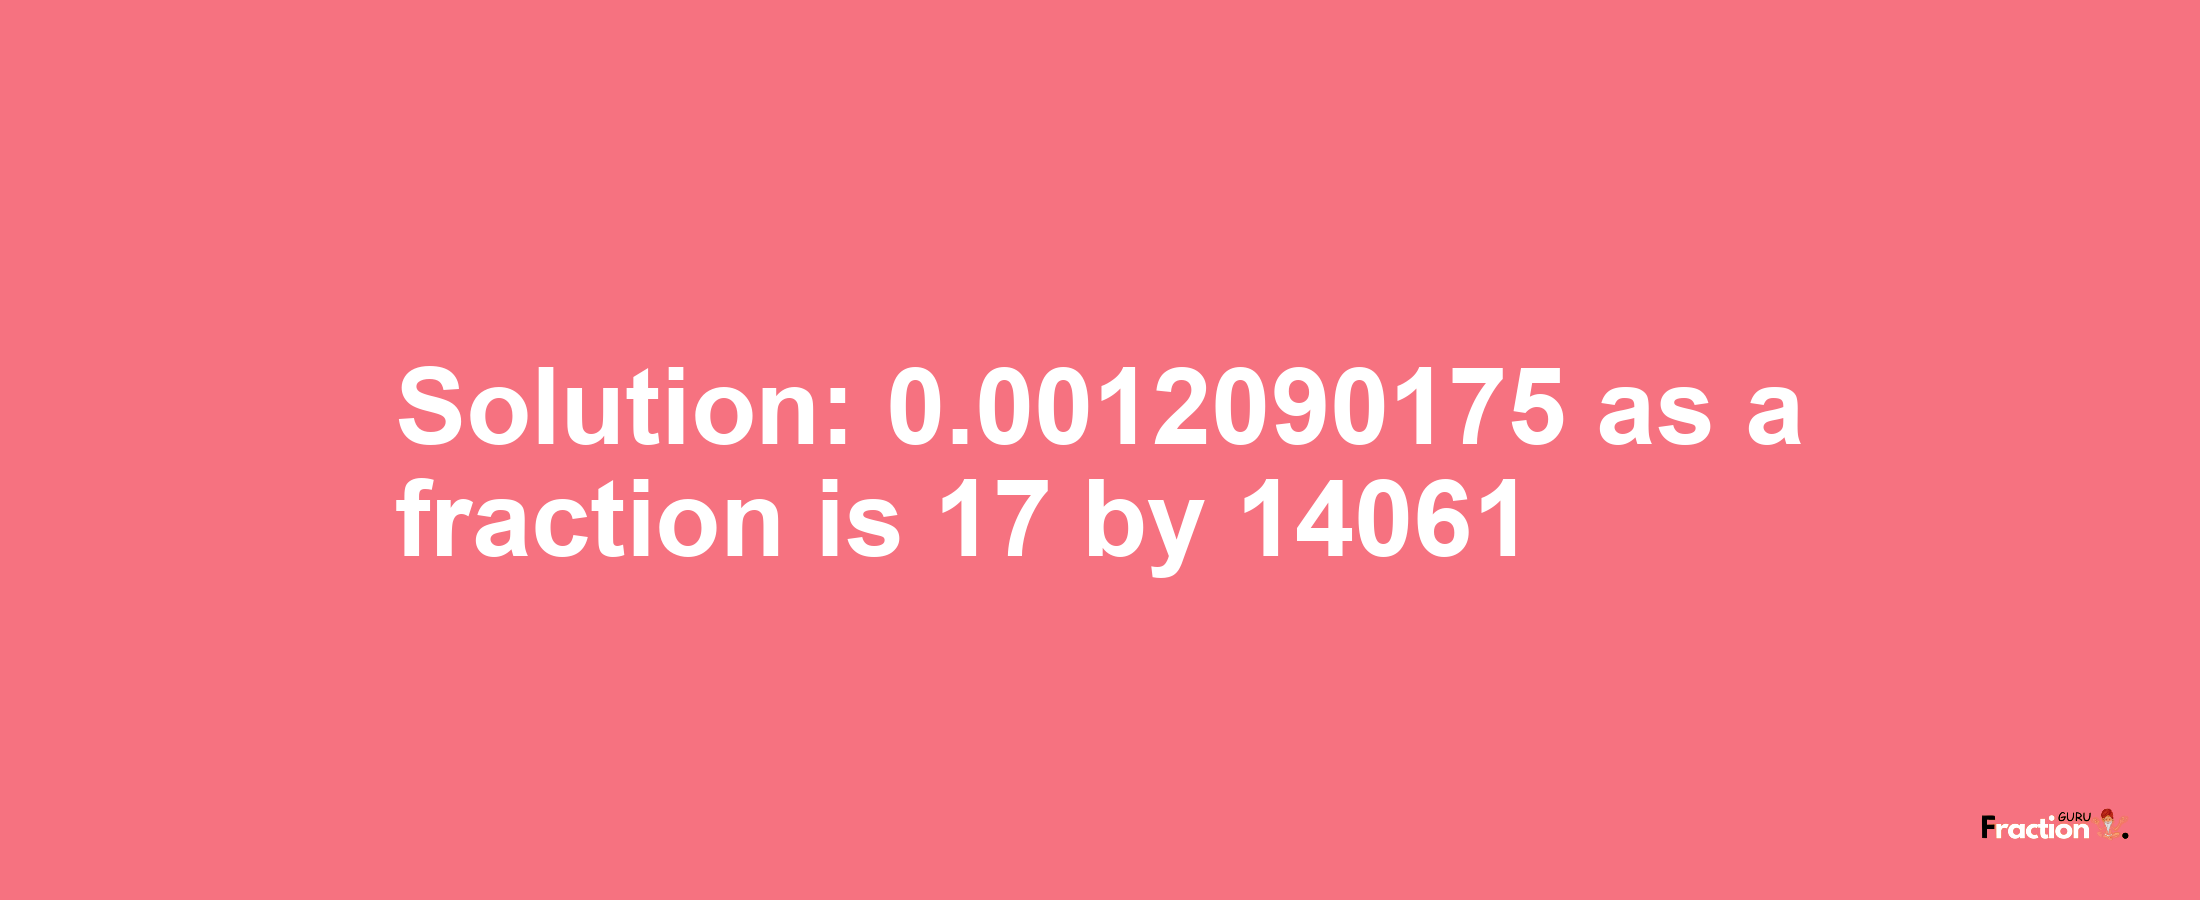 Solution:0.0012090175 as a fraction is 17/14061